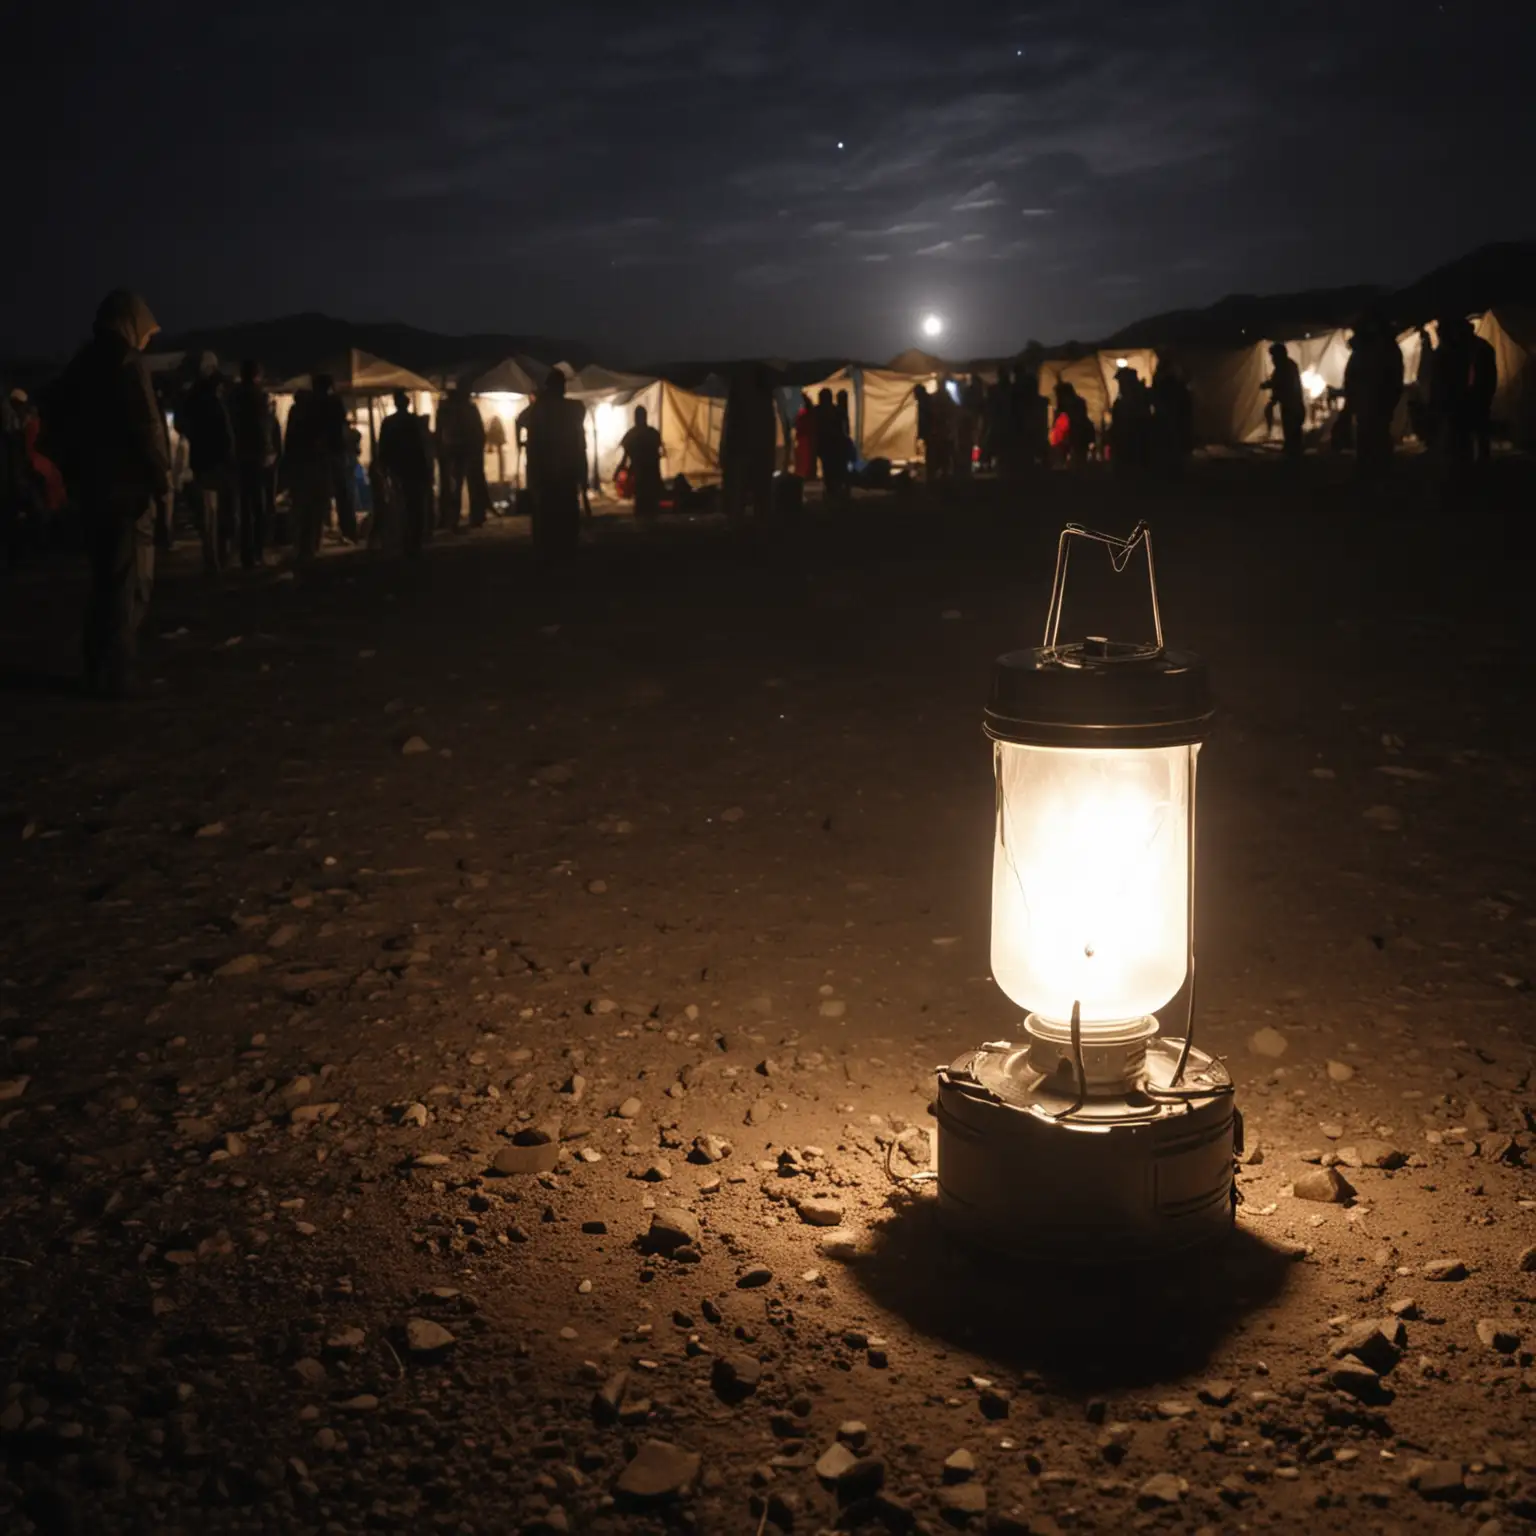 the portable light lamp is on the poof refugees camp lighten up in the total darkness